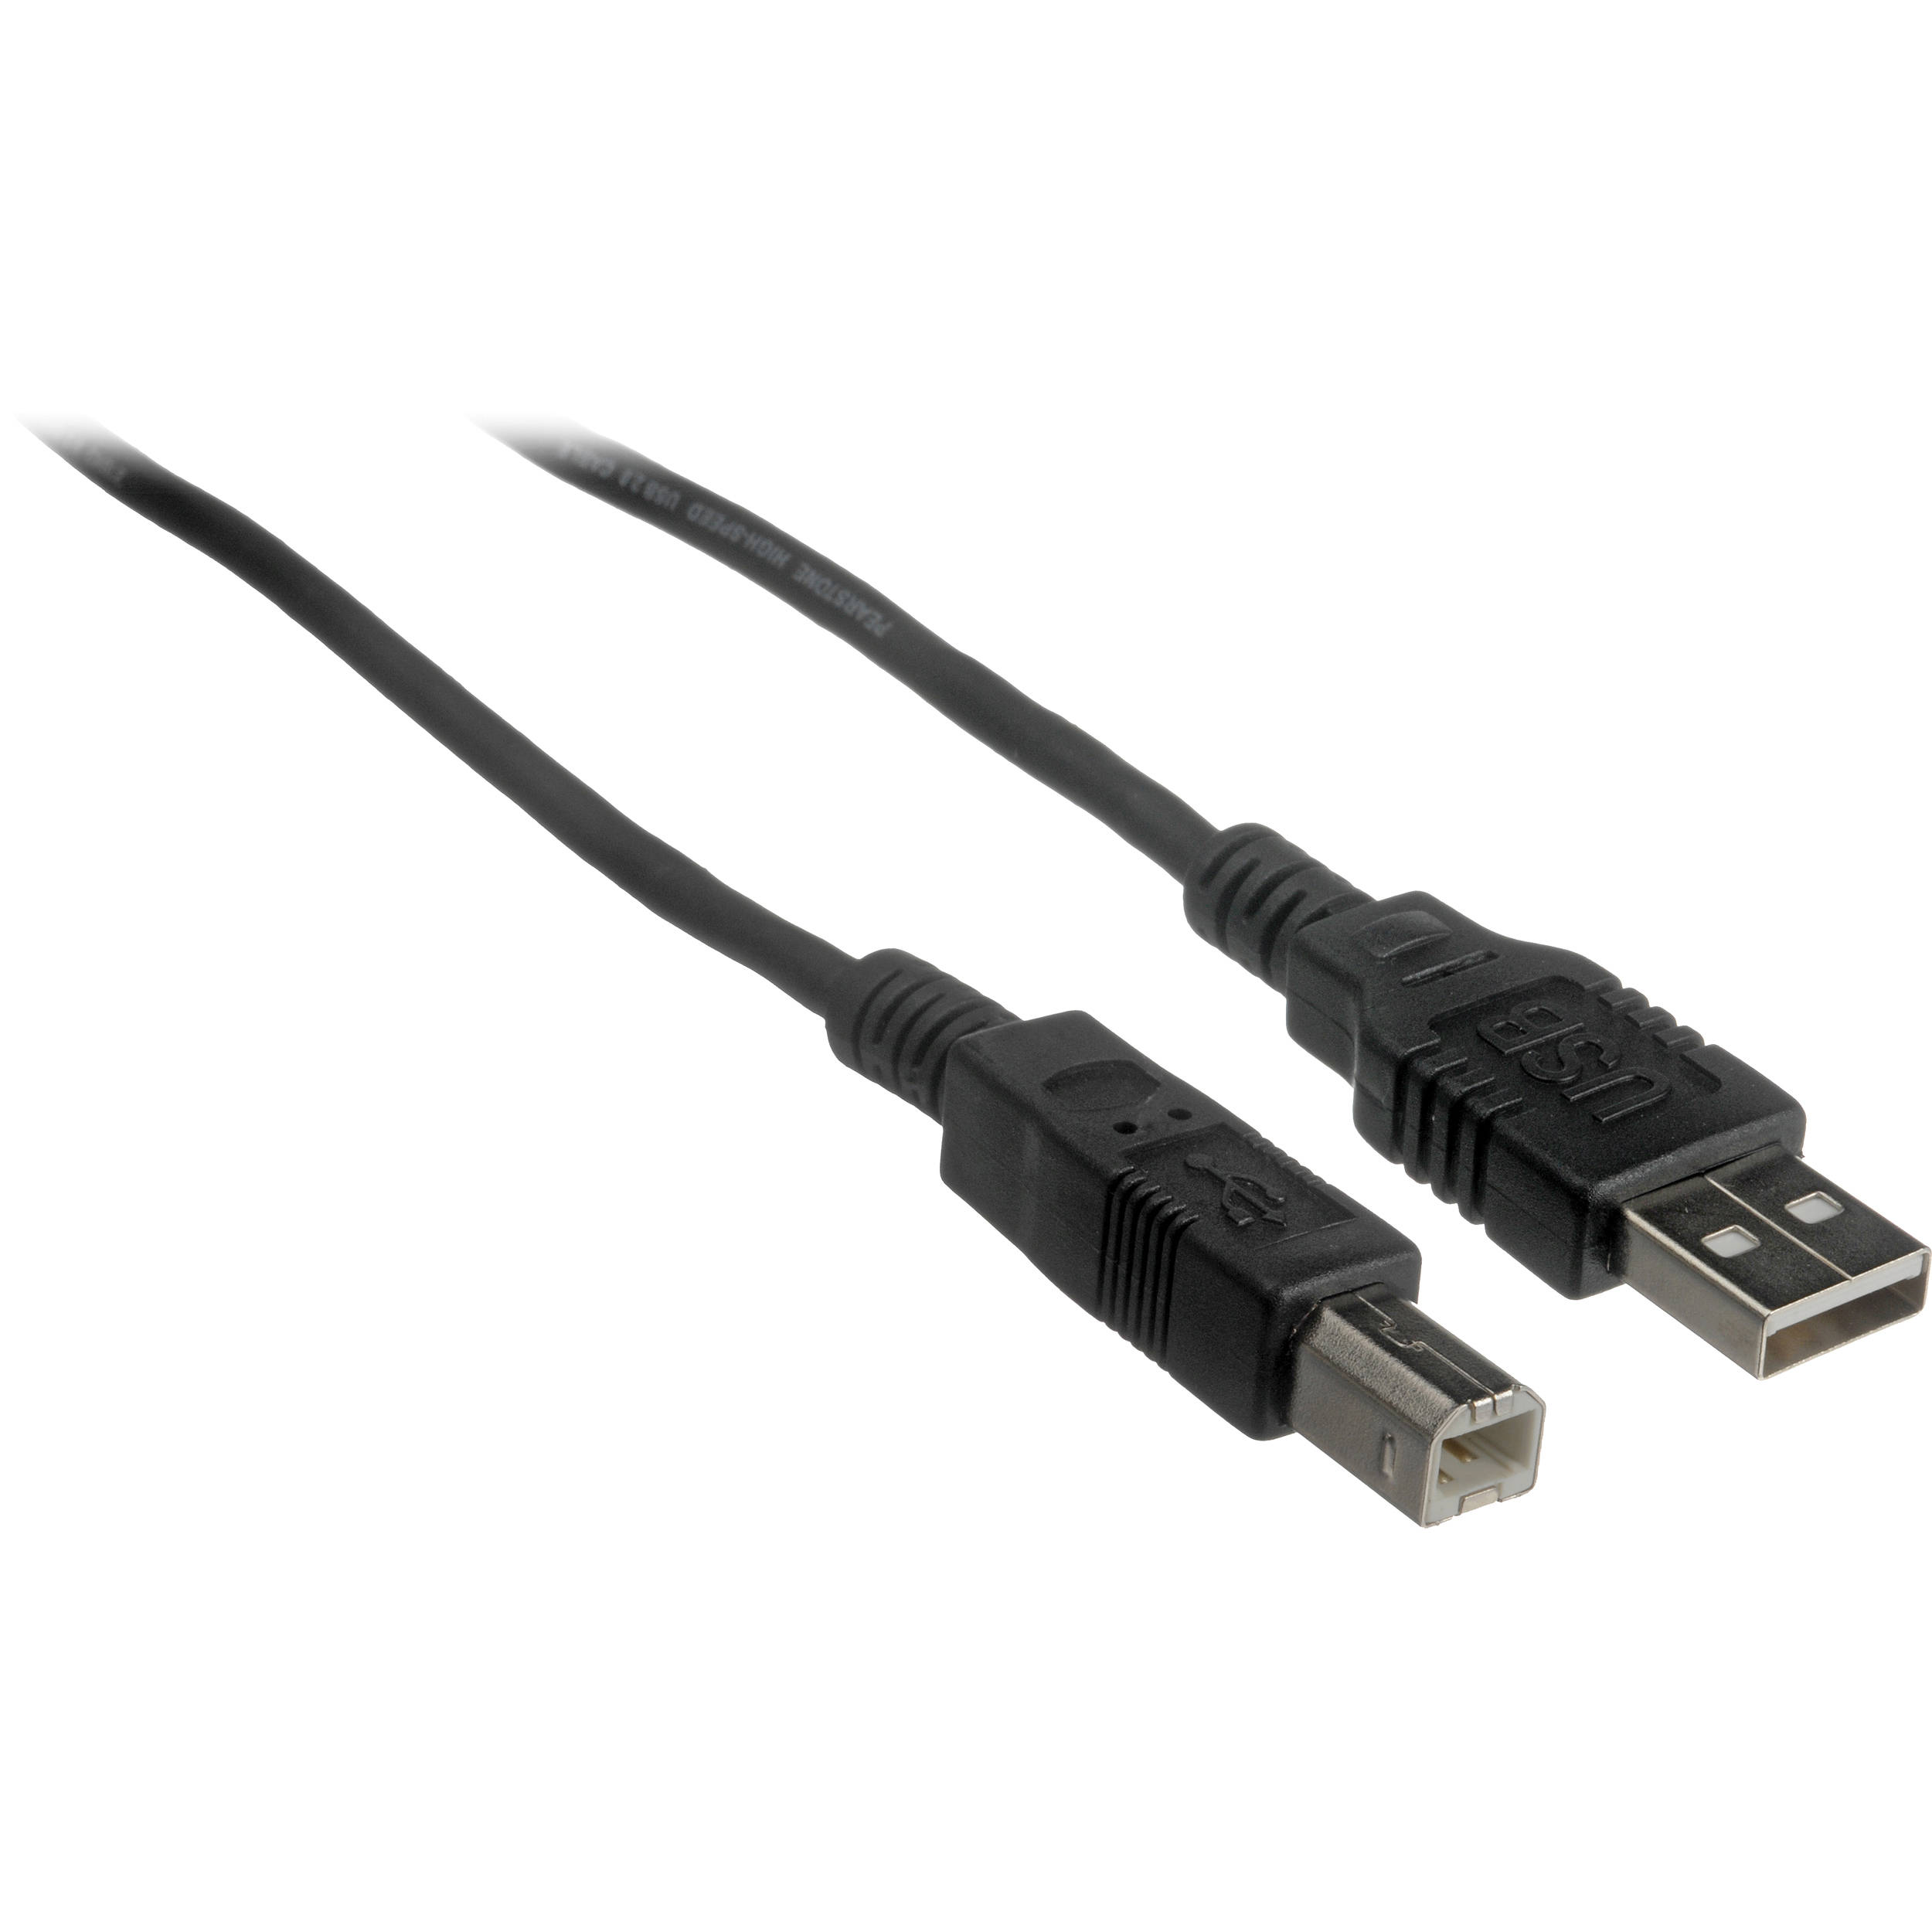 Pearstone USB 2.0 Type A Male to Type B Male Cable - 6' USB-AB6